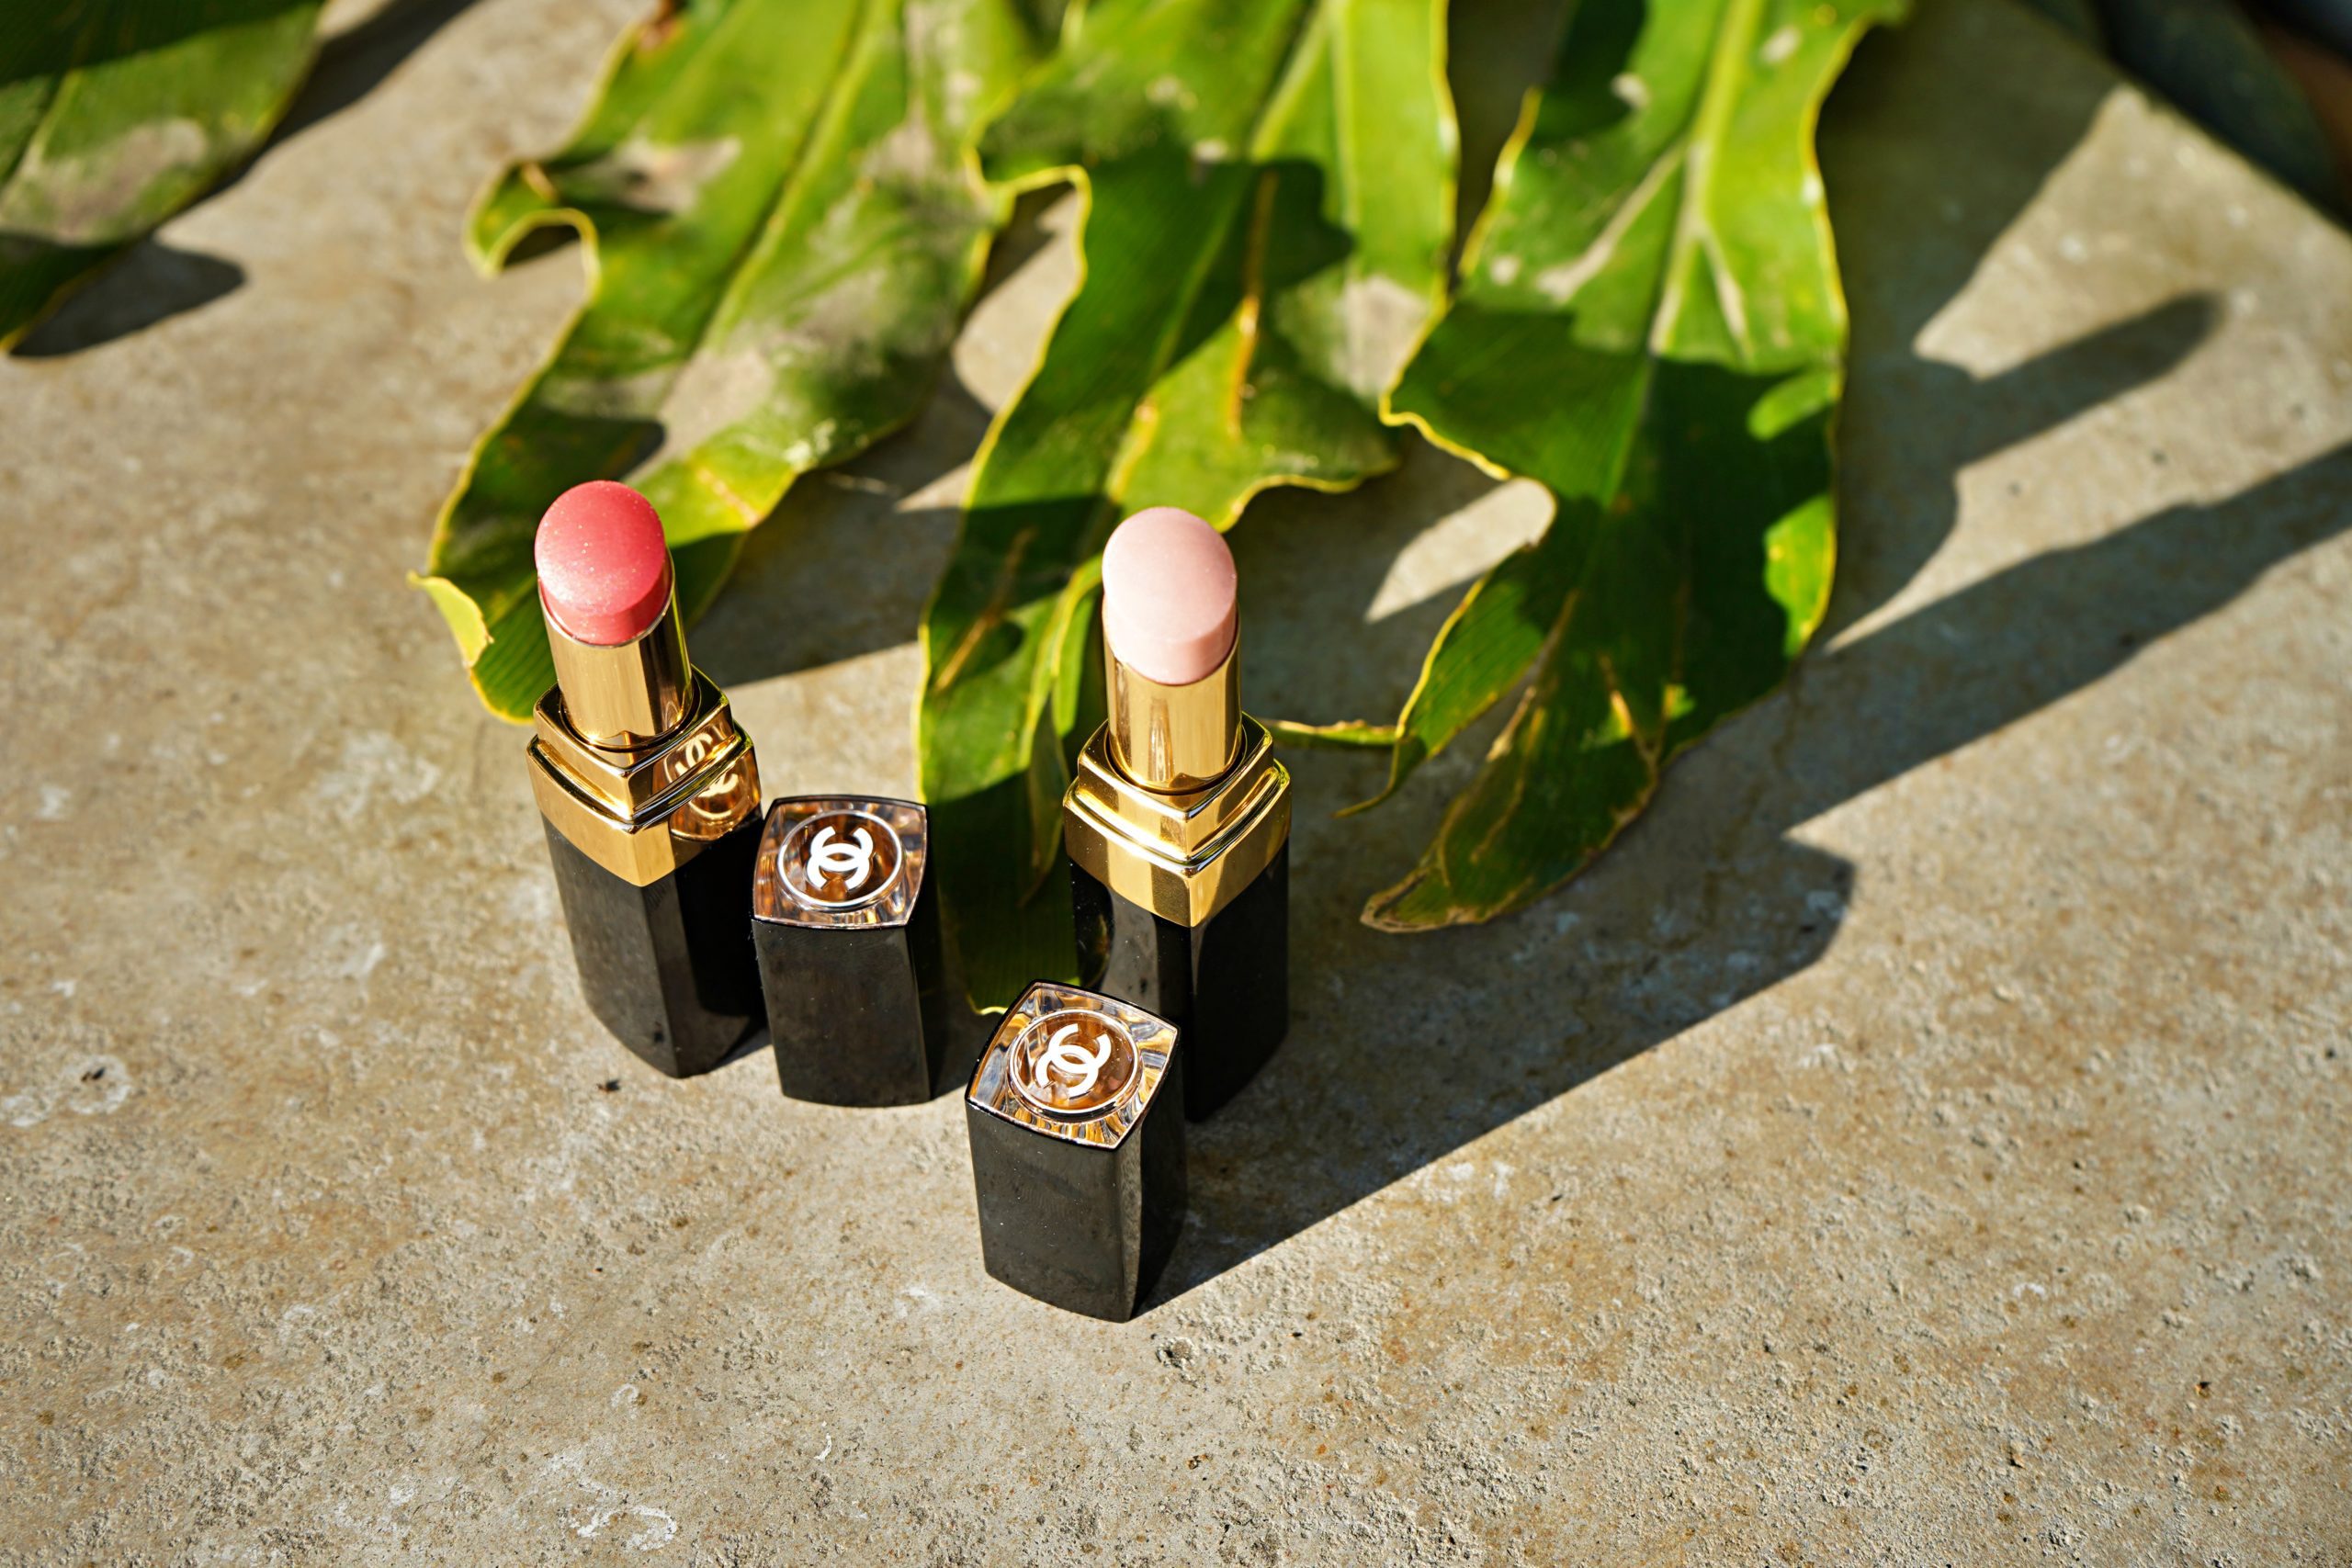 Chanel Rouge Coco Flash Lipsticks in Flushed and Douceur